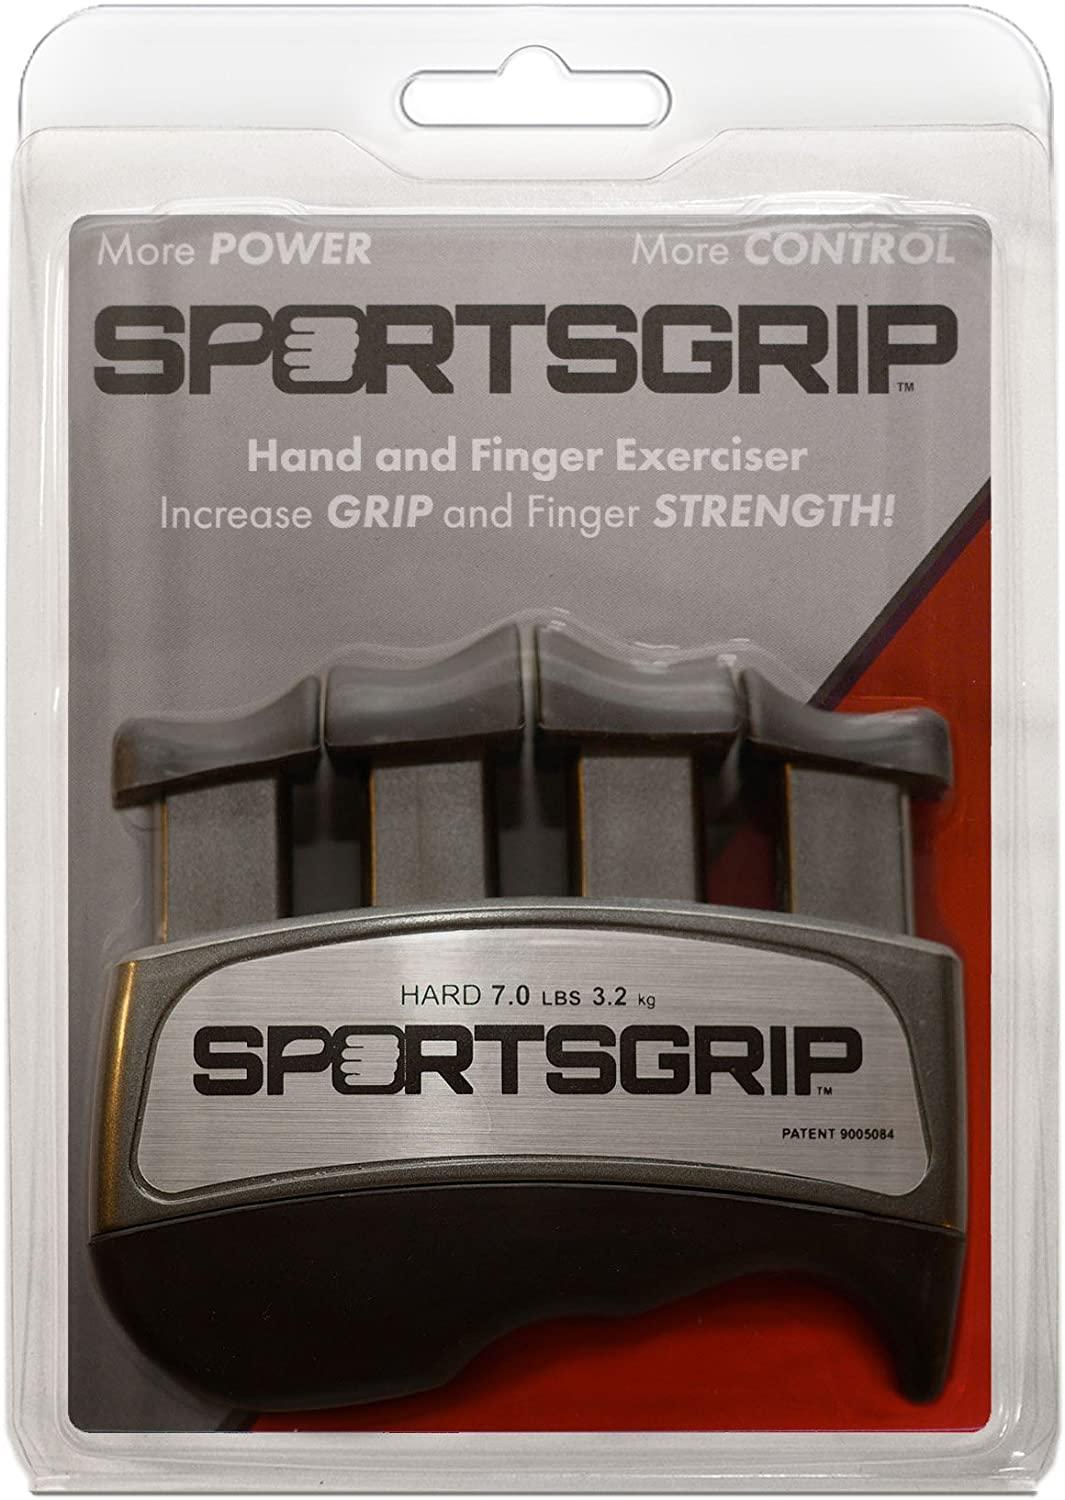  Power Grip Exerciser : Sports & Outdoors